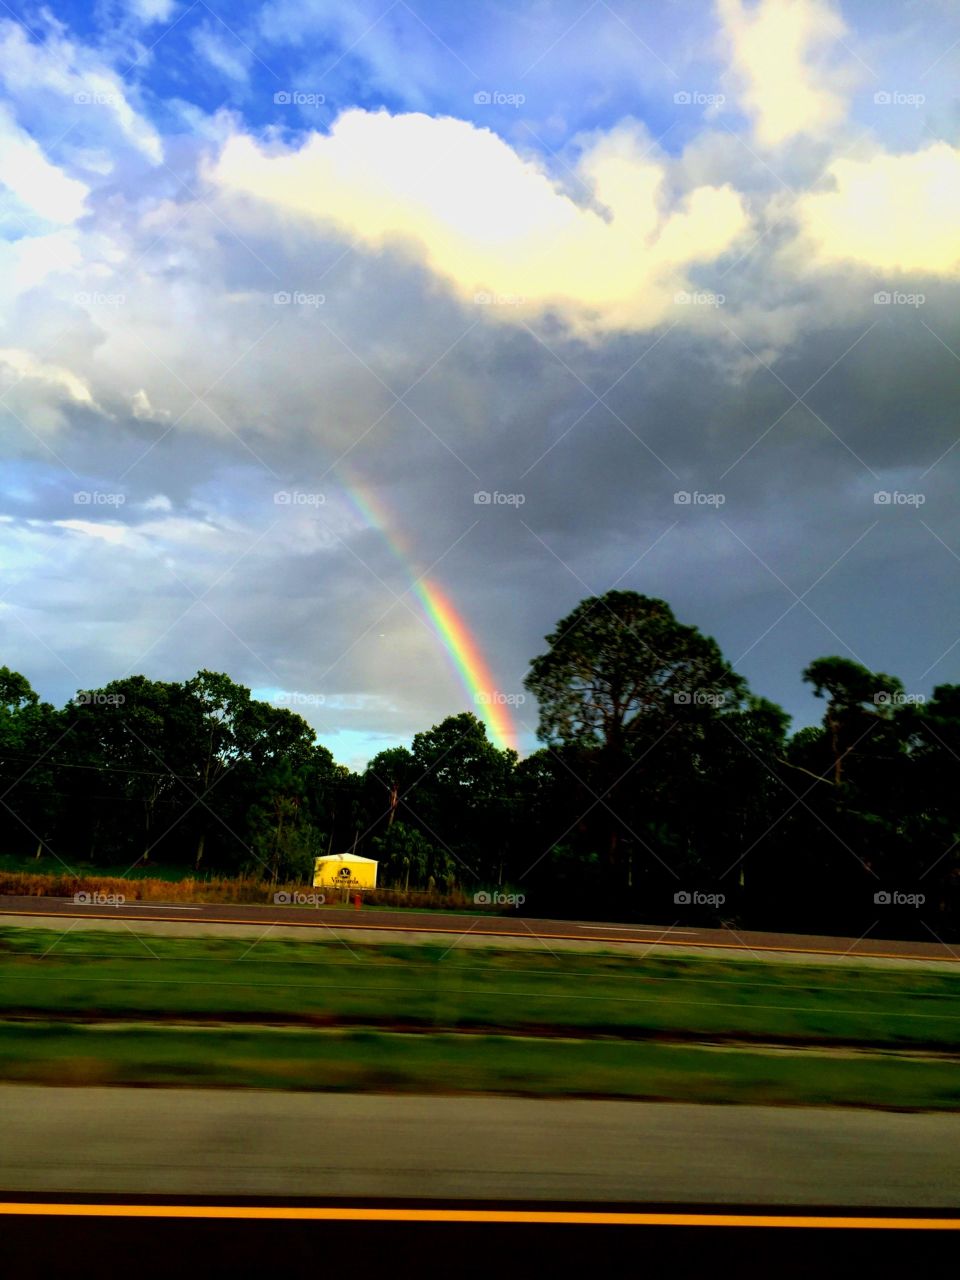 A rainbow in Fort Meyers.